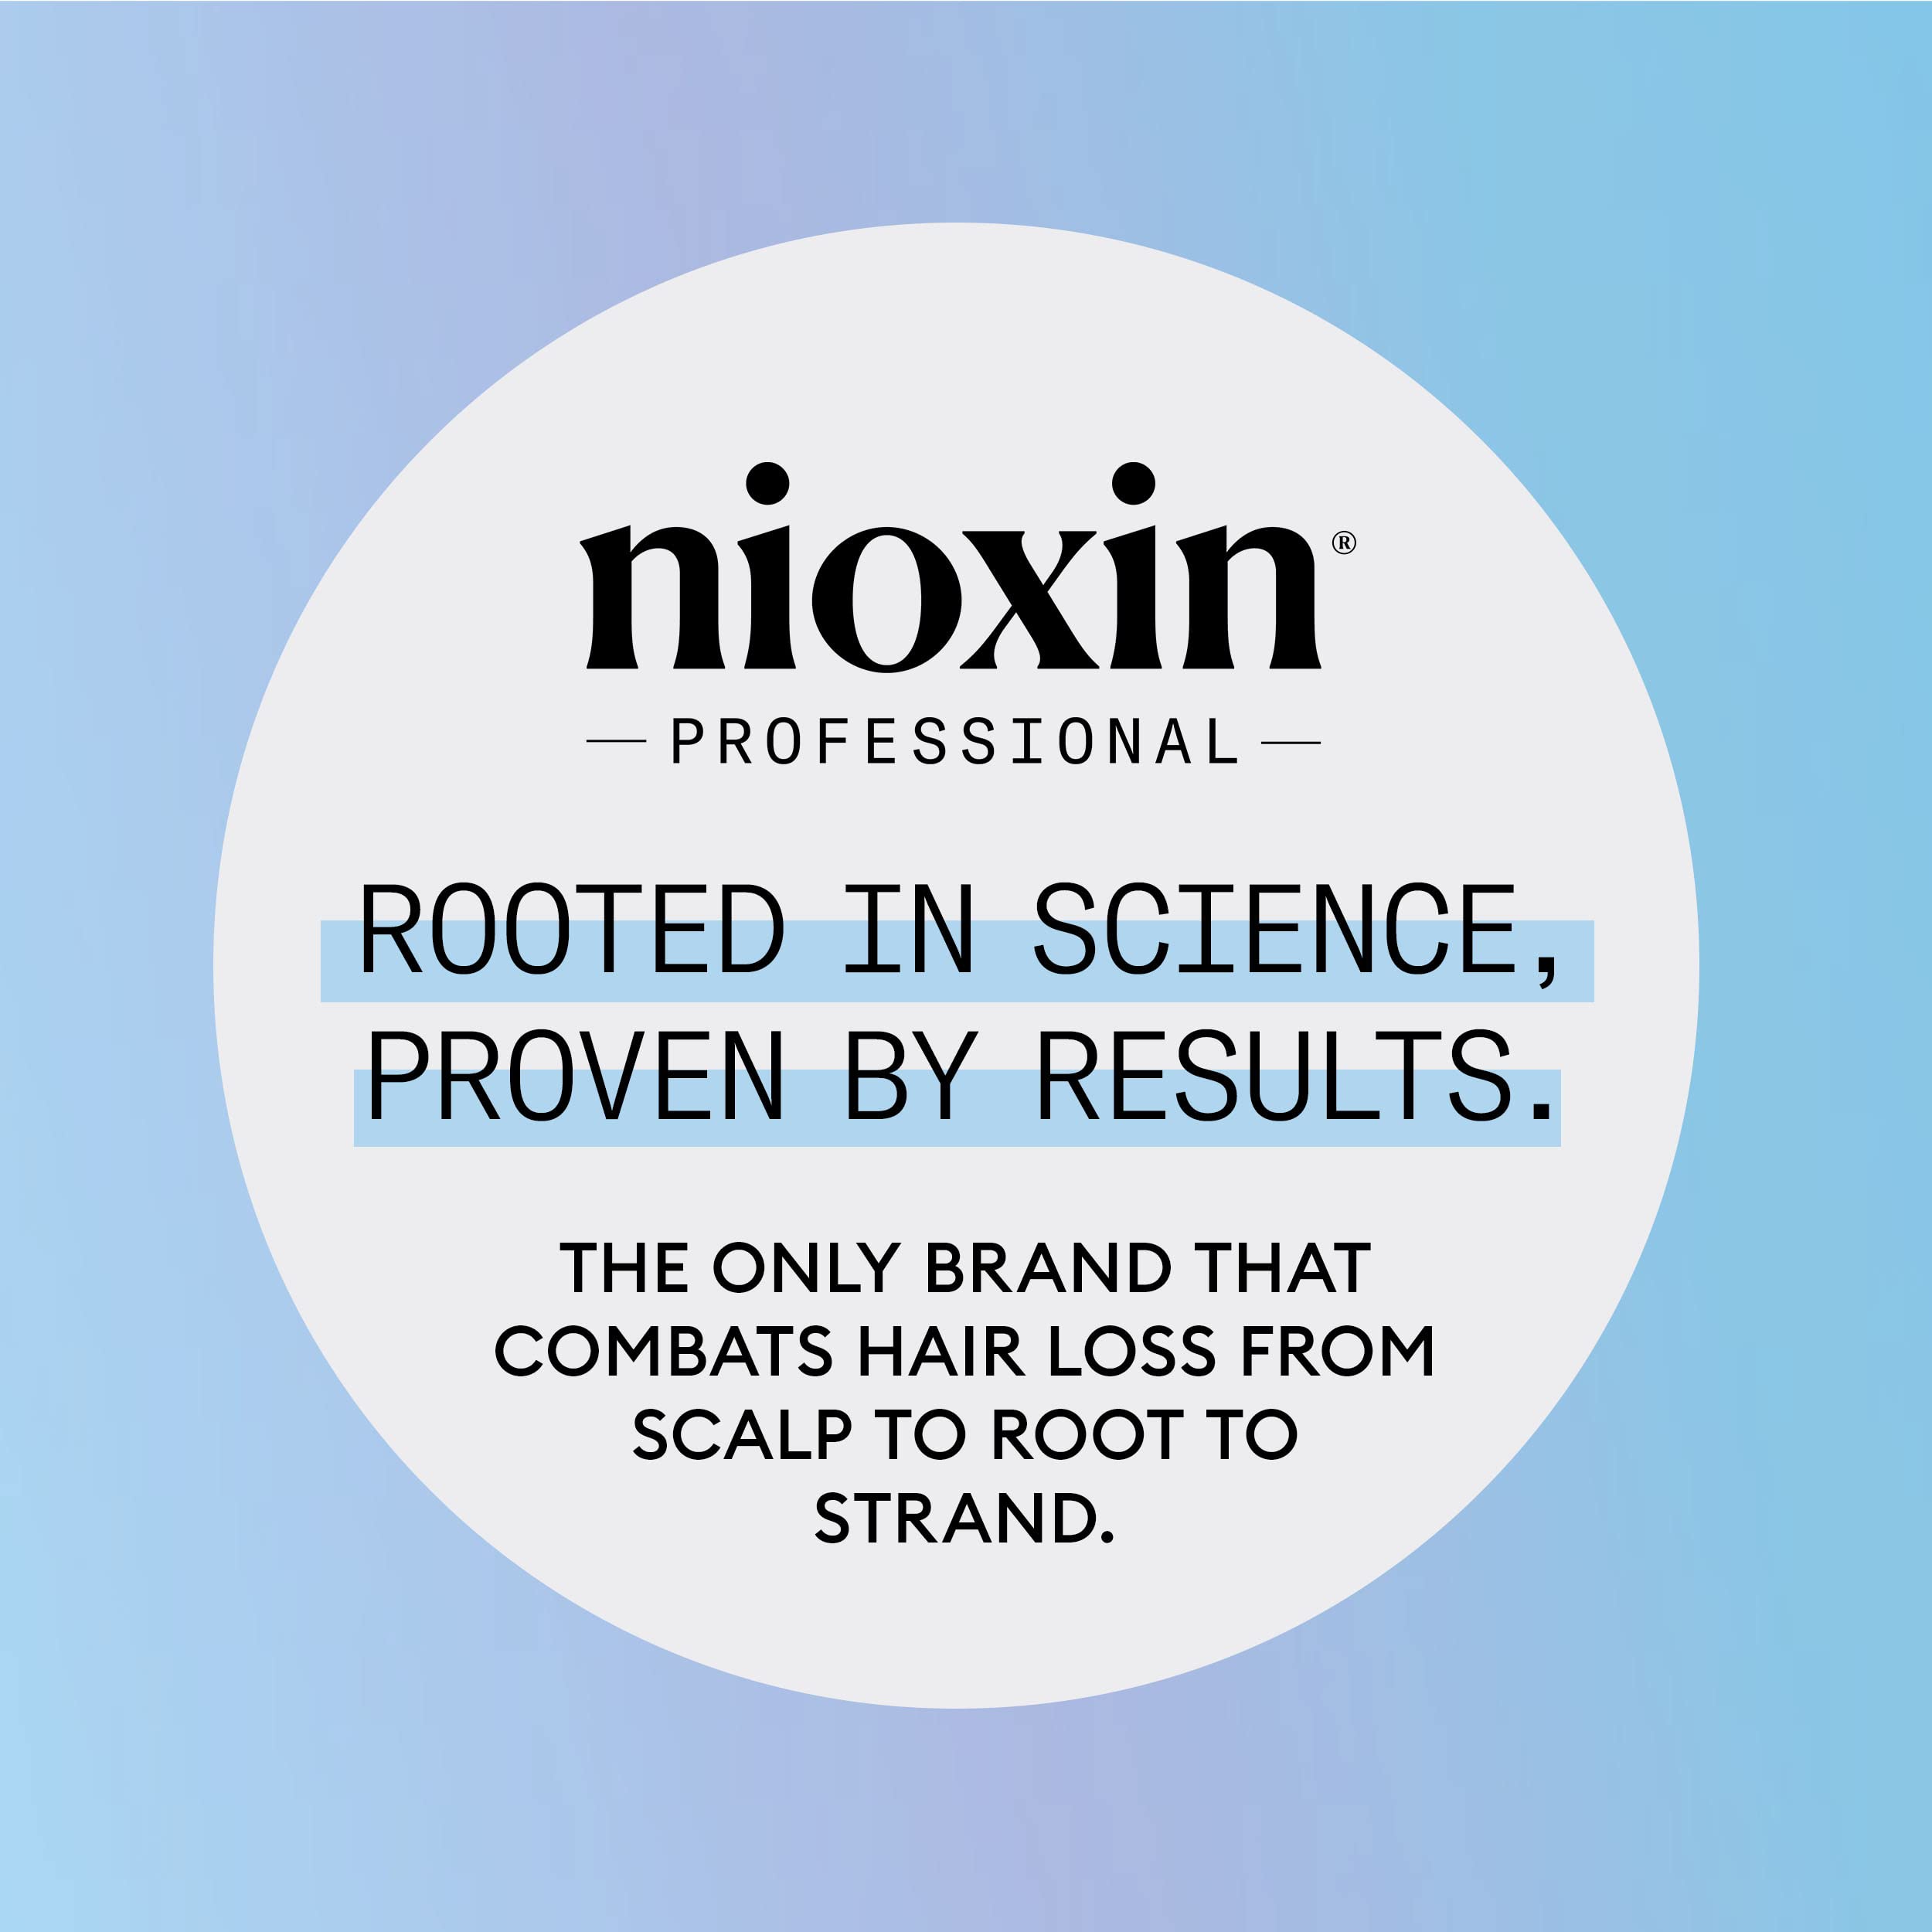 Nioxin Ultimate Power Serum, Anti Hair Loss Leave-In Hair Treatment with Caffeine + Night Density Rescue, Overnight Antioxidant Leave-in Serum, Night and Day Hair and Scalp Treatment Bundle